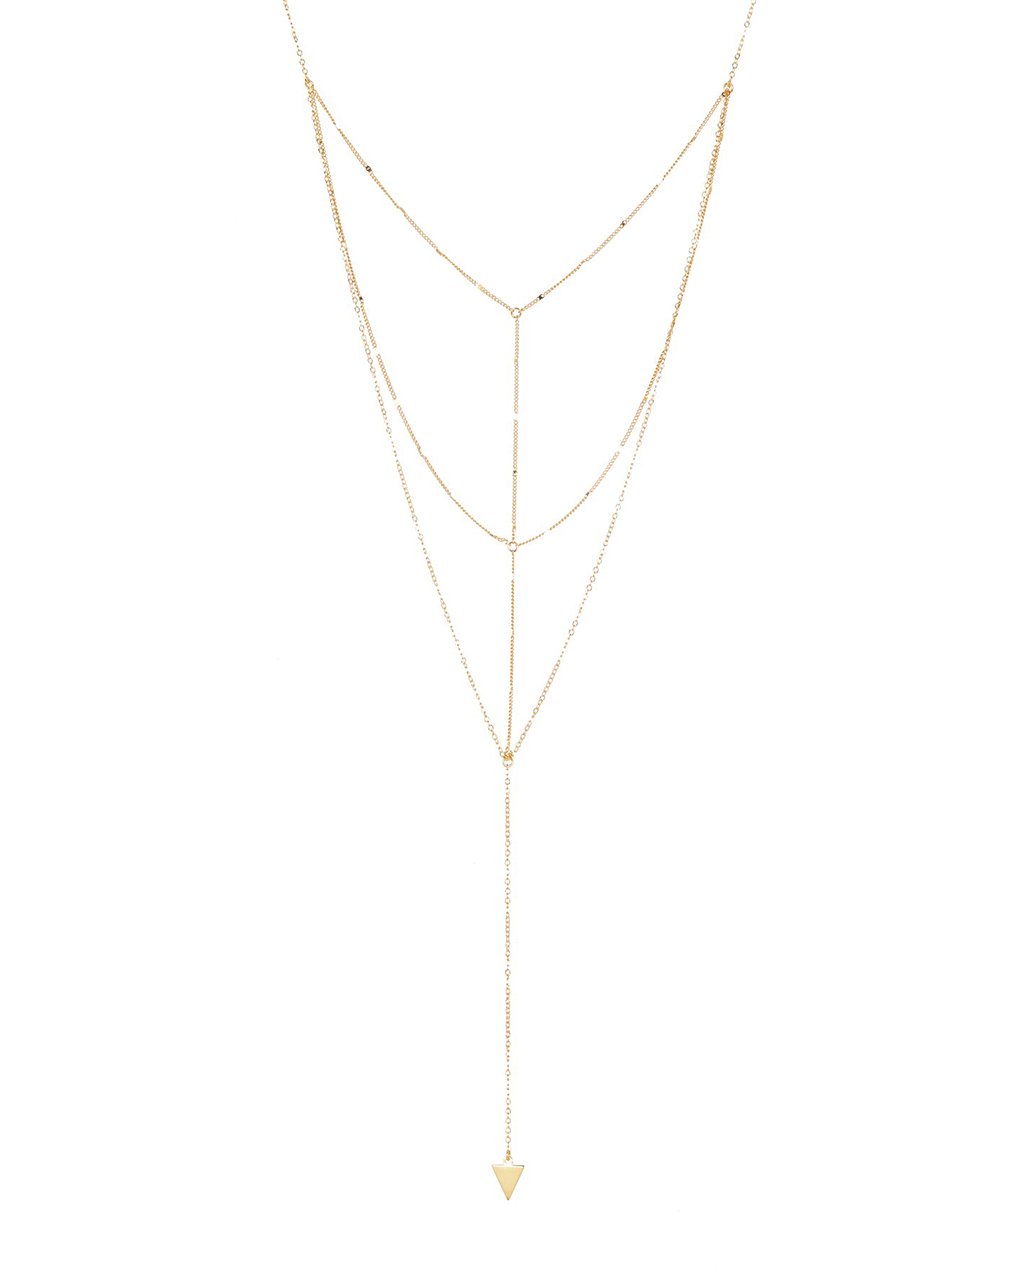 Triple Layer Triangle Drop Chain Necklace - Sterling Forever